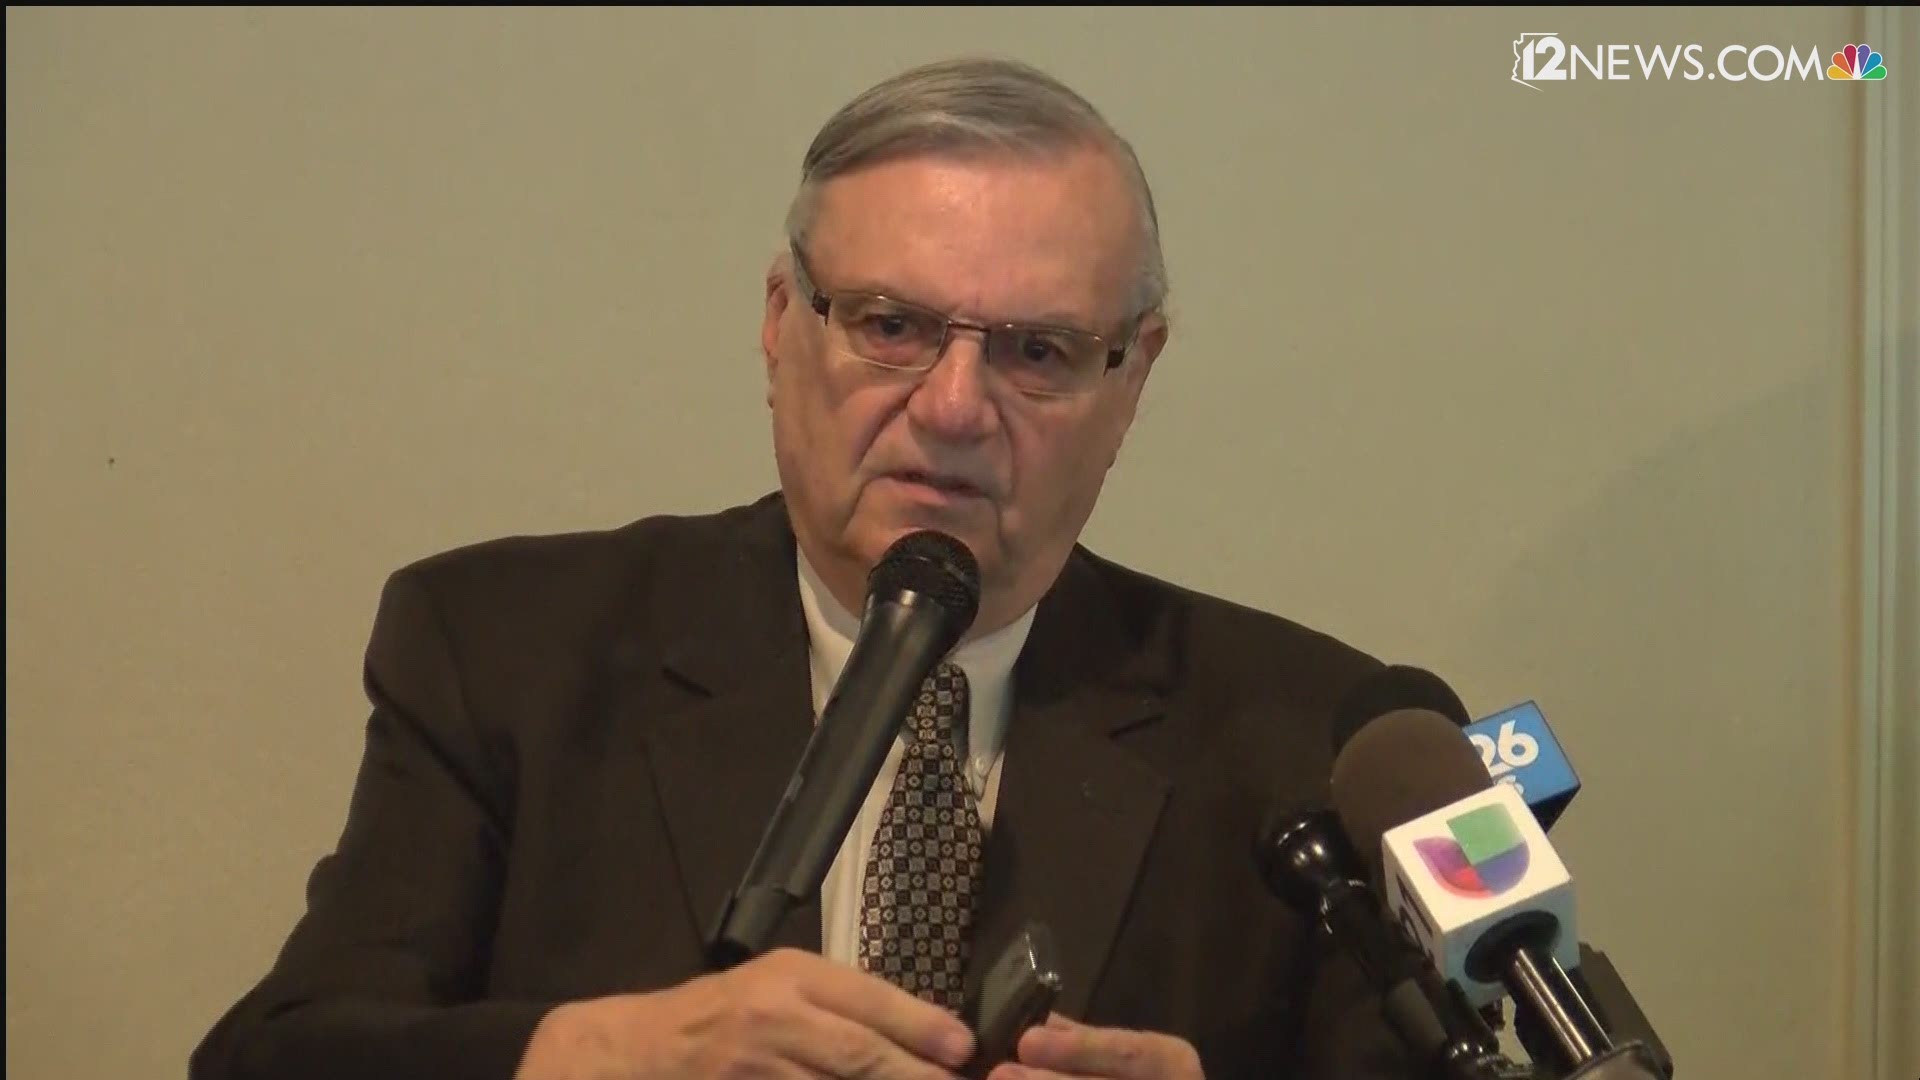 Former sheriff Joe Arpaio maintains Obama's birth certificate is fake while taking questions at Fresno GOP fundraiser.